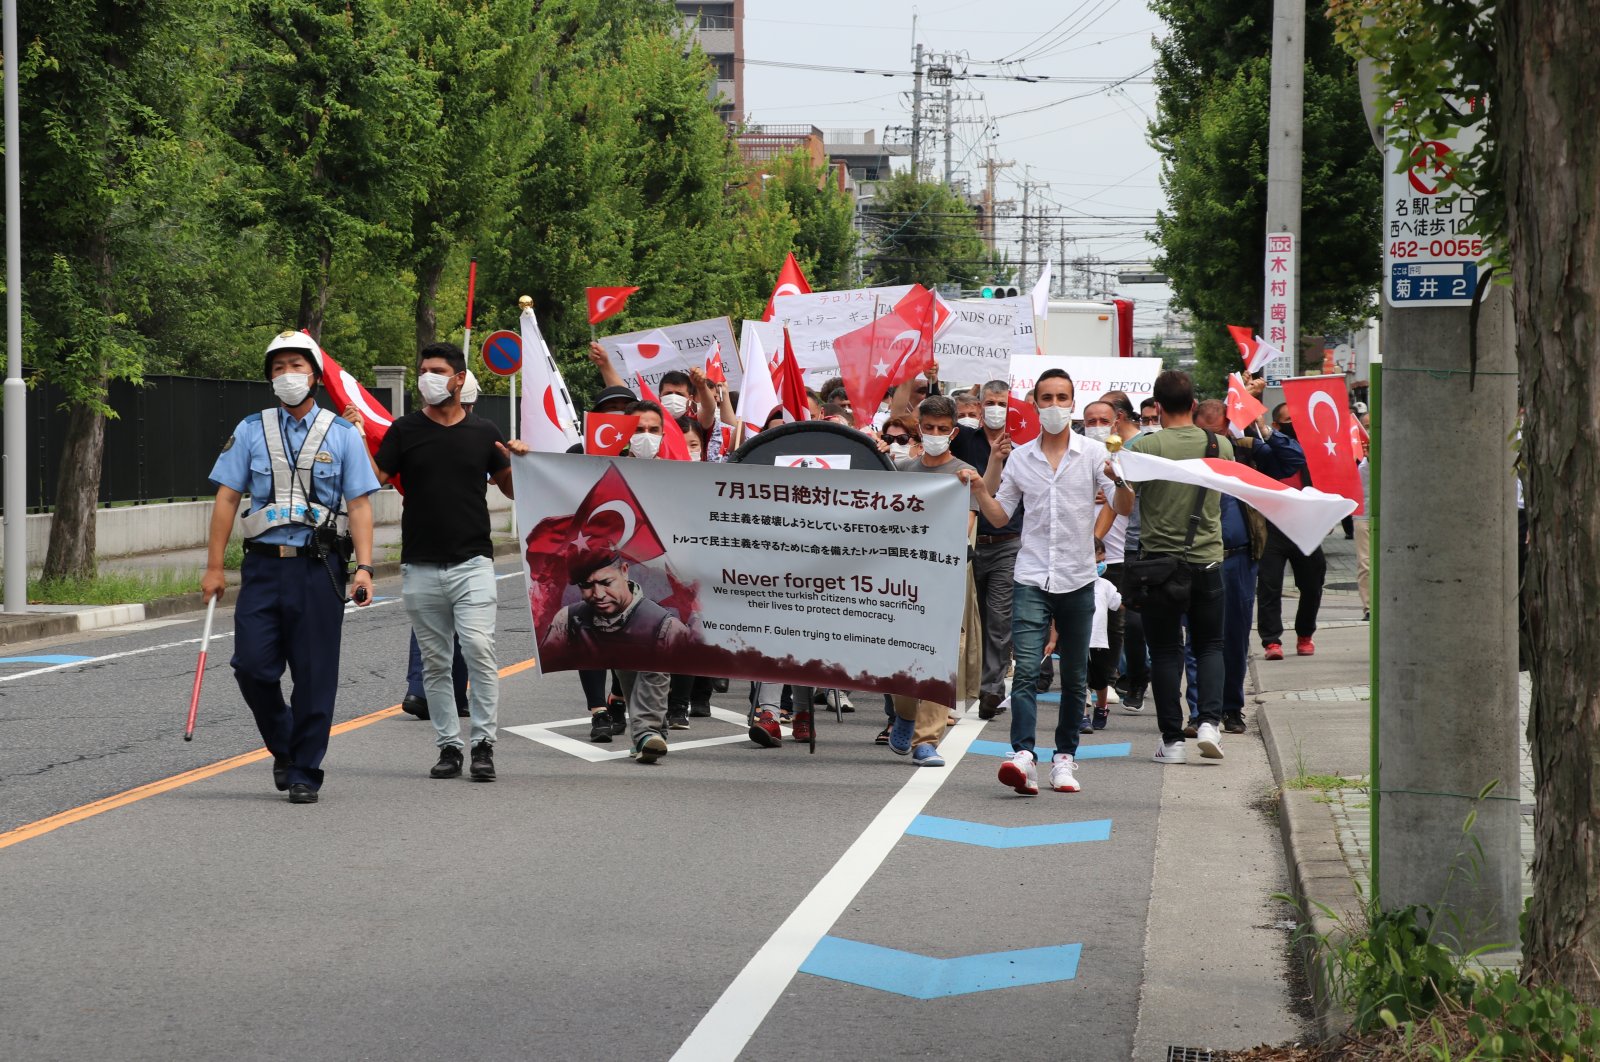 People demonstrate in front of the Enishi International School (EIS), which is linked to the Gülenist Terror Group (FETÖ), in central Nagoya, Japan, Aug. 4, 2020. (AA Photo)